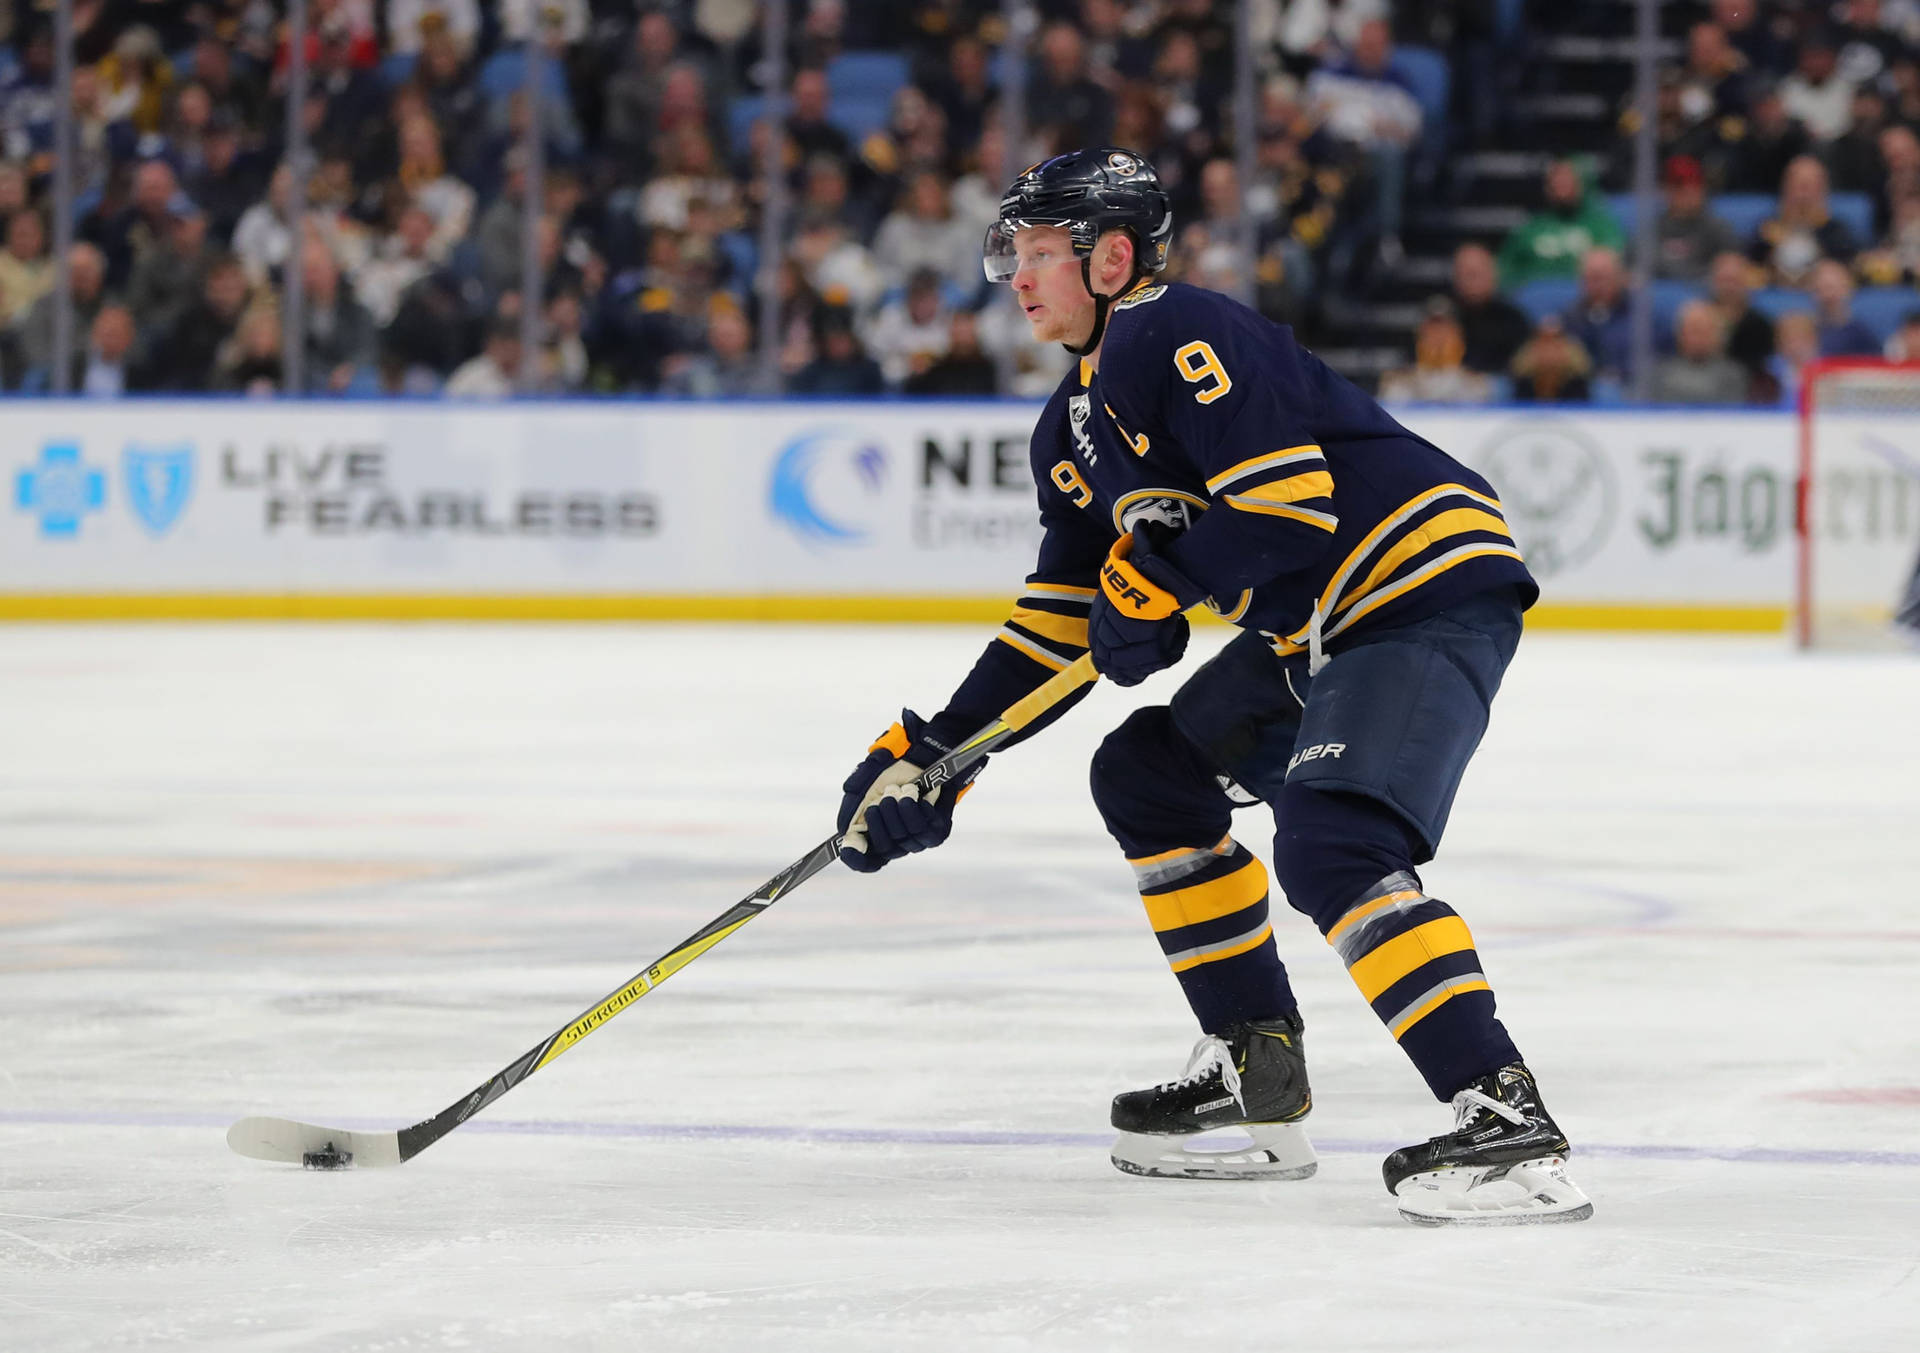 Jack Eichel, Star Player of Buffalo Sabres, skillfully handling the puck Wallpaper